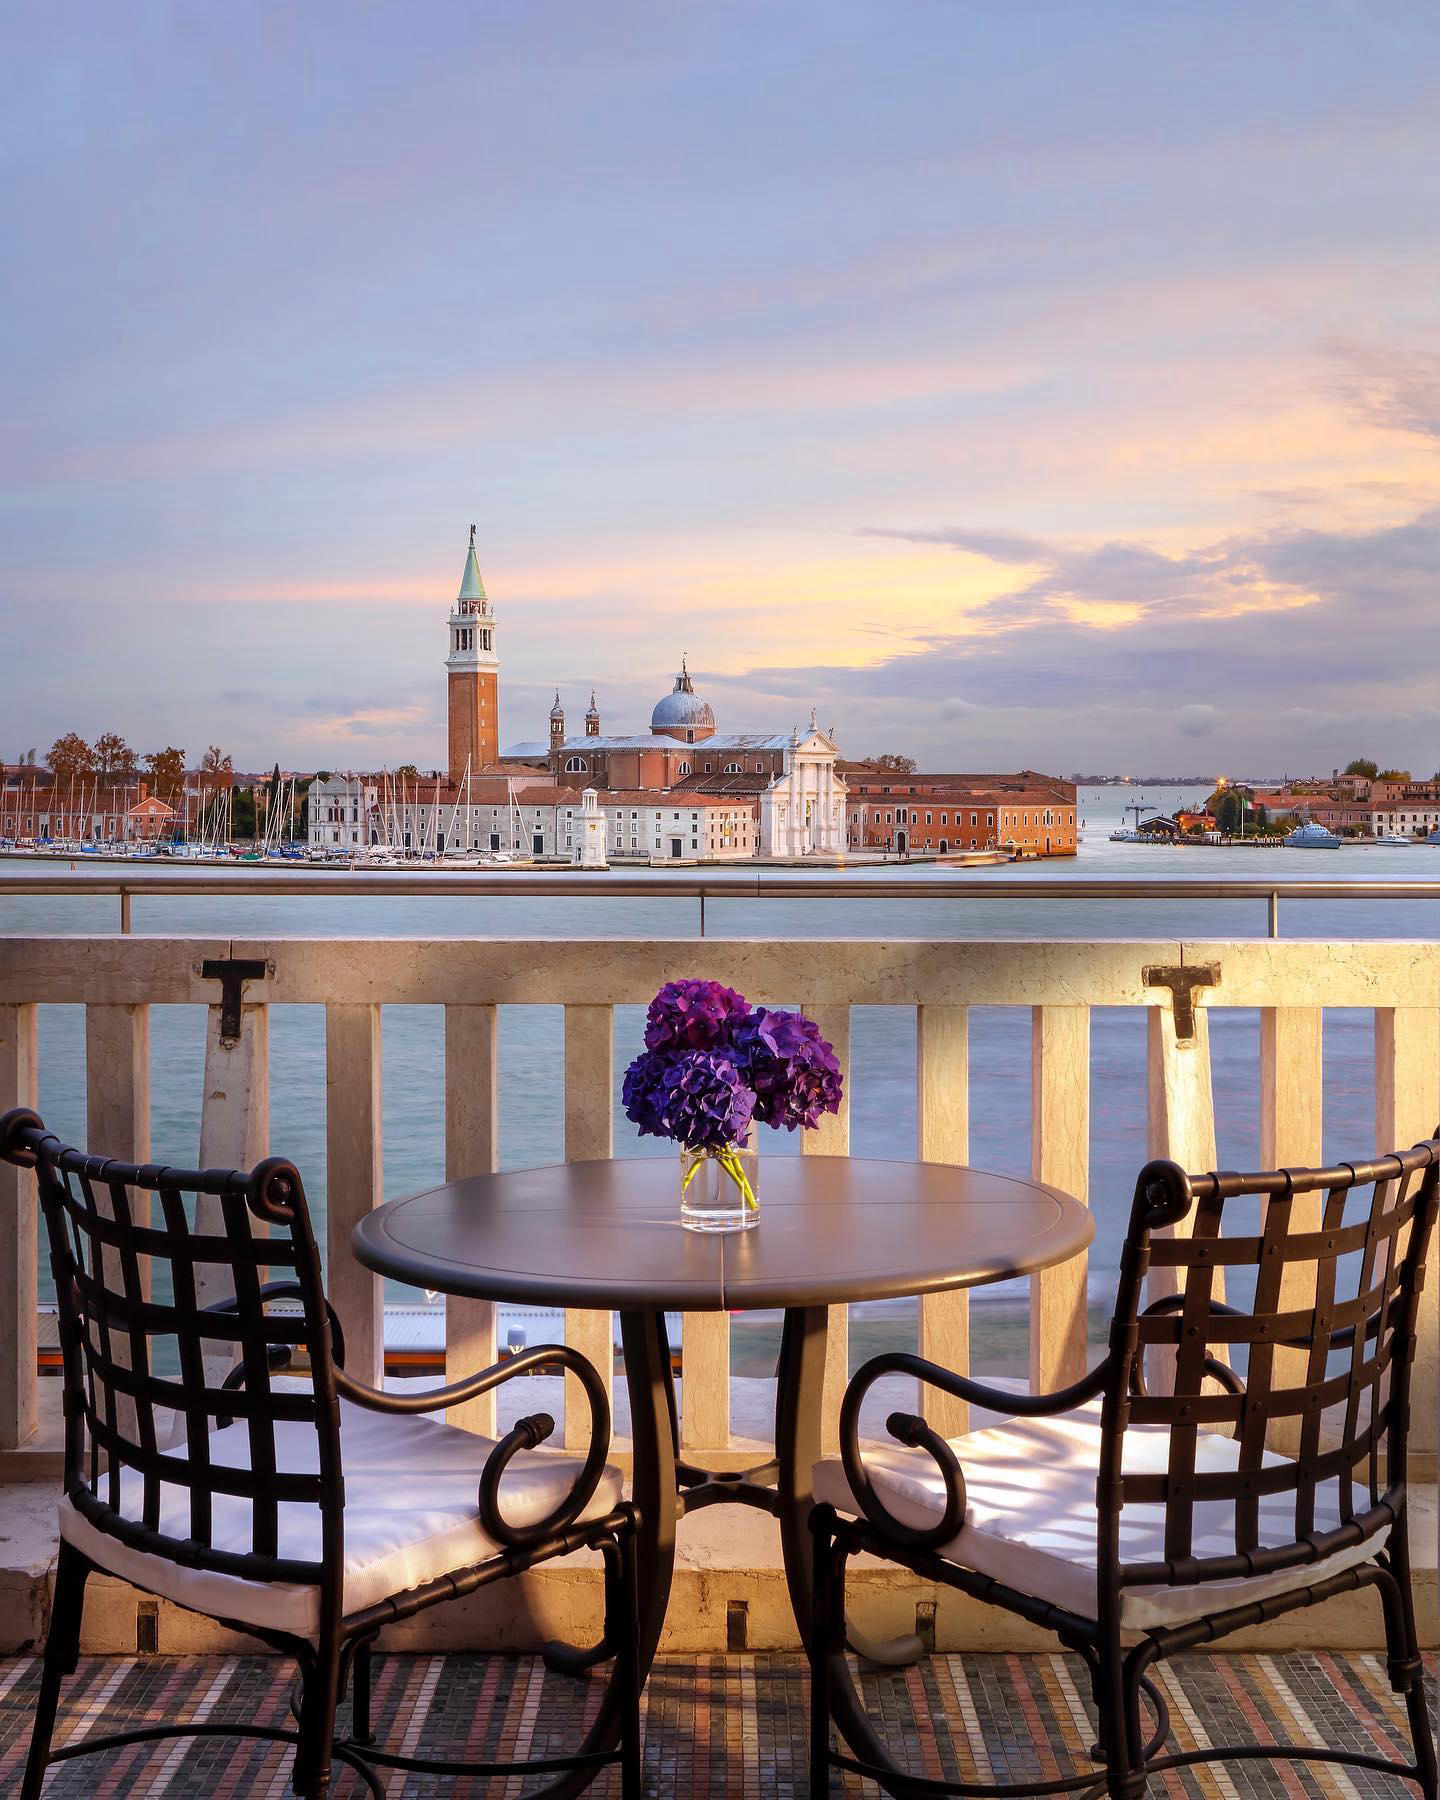 image  1 Paying tribute to the stunning views over the Bacino San Marco and its iconic monuments